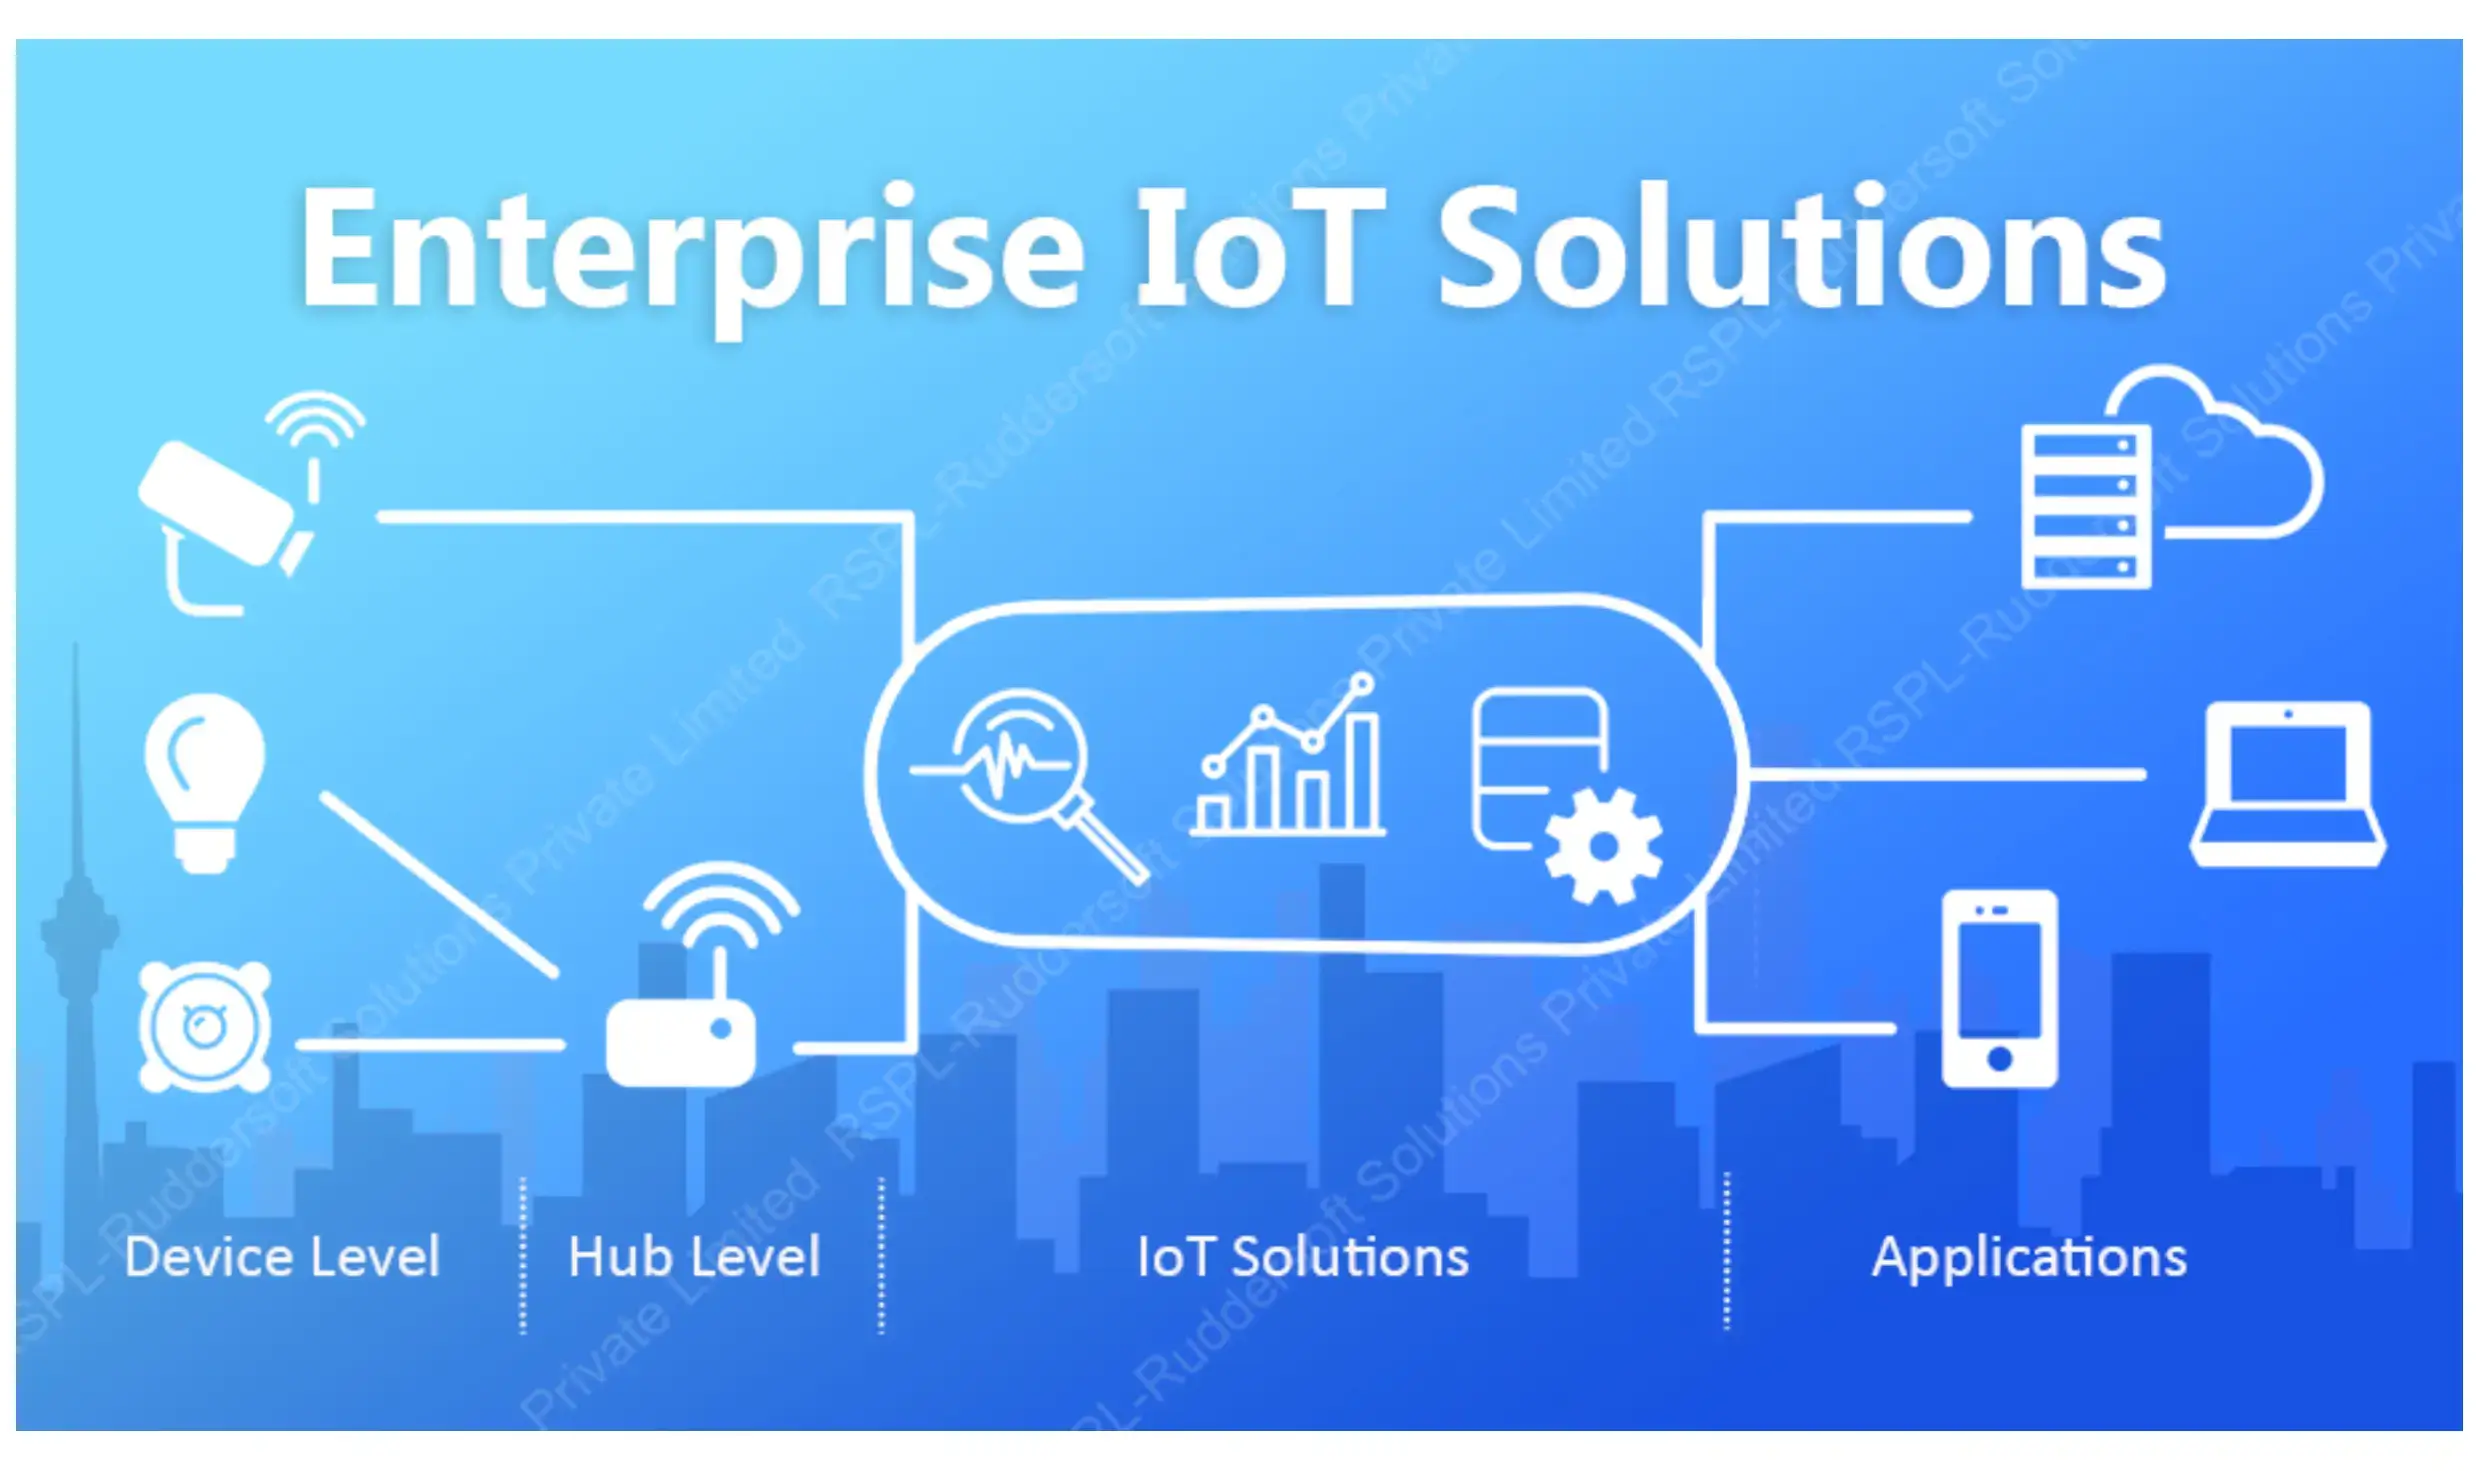 End-To-End Industrial & Enterprise Iot Solutions And Services For The Connected & Automated World